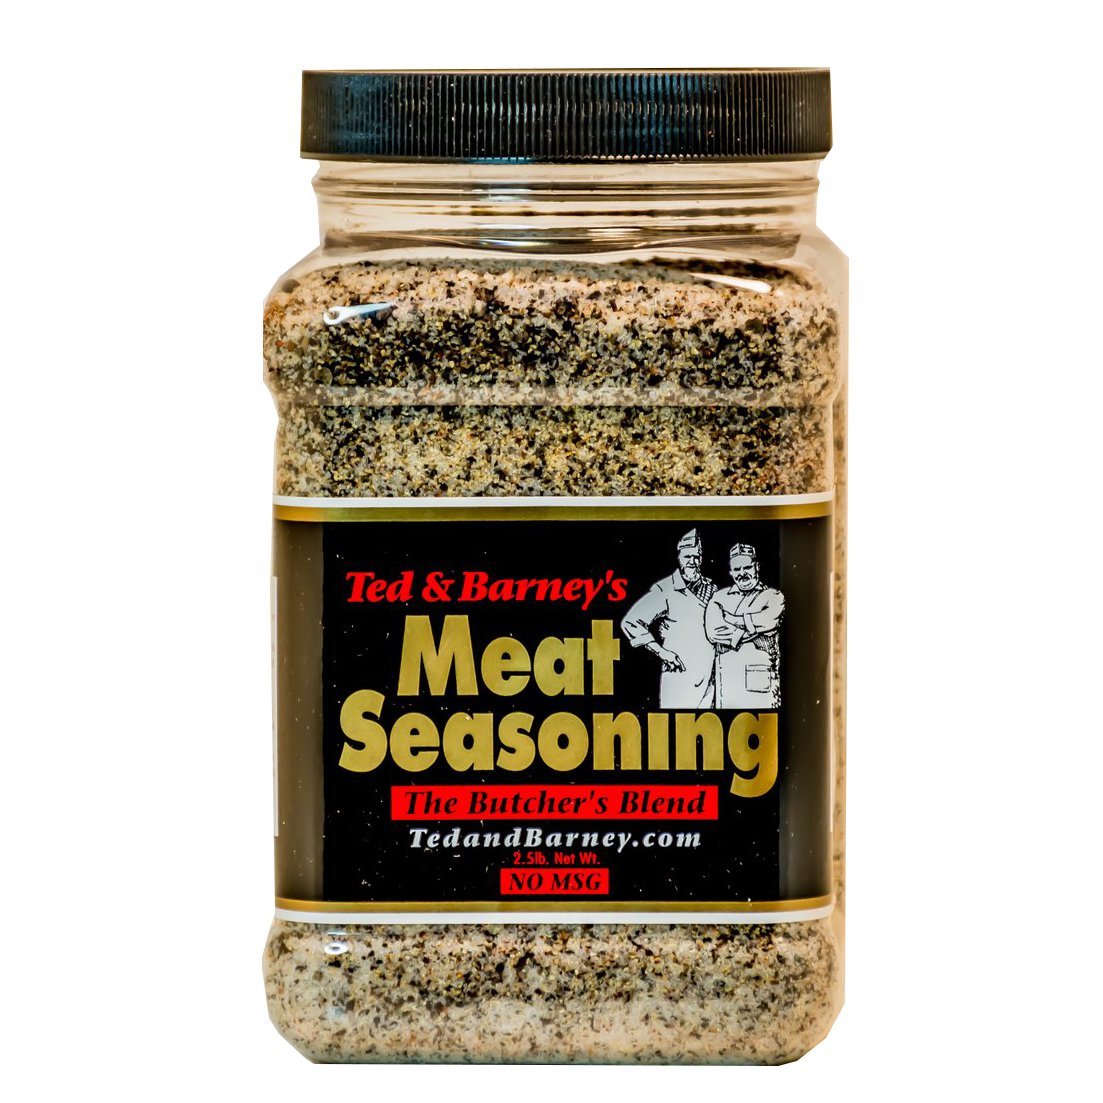 Ted & Barney's Meat Seasoning The Butcher's Blend 2.5lbs - Pacific Flyway Supplies